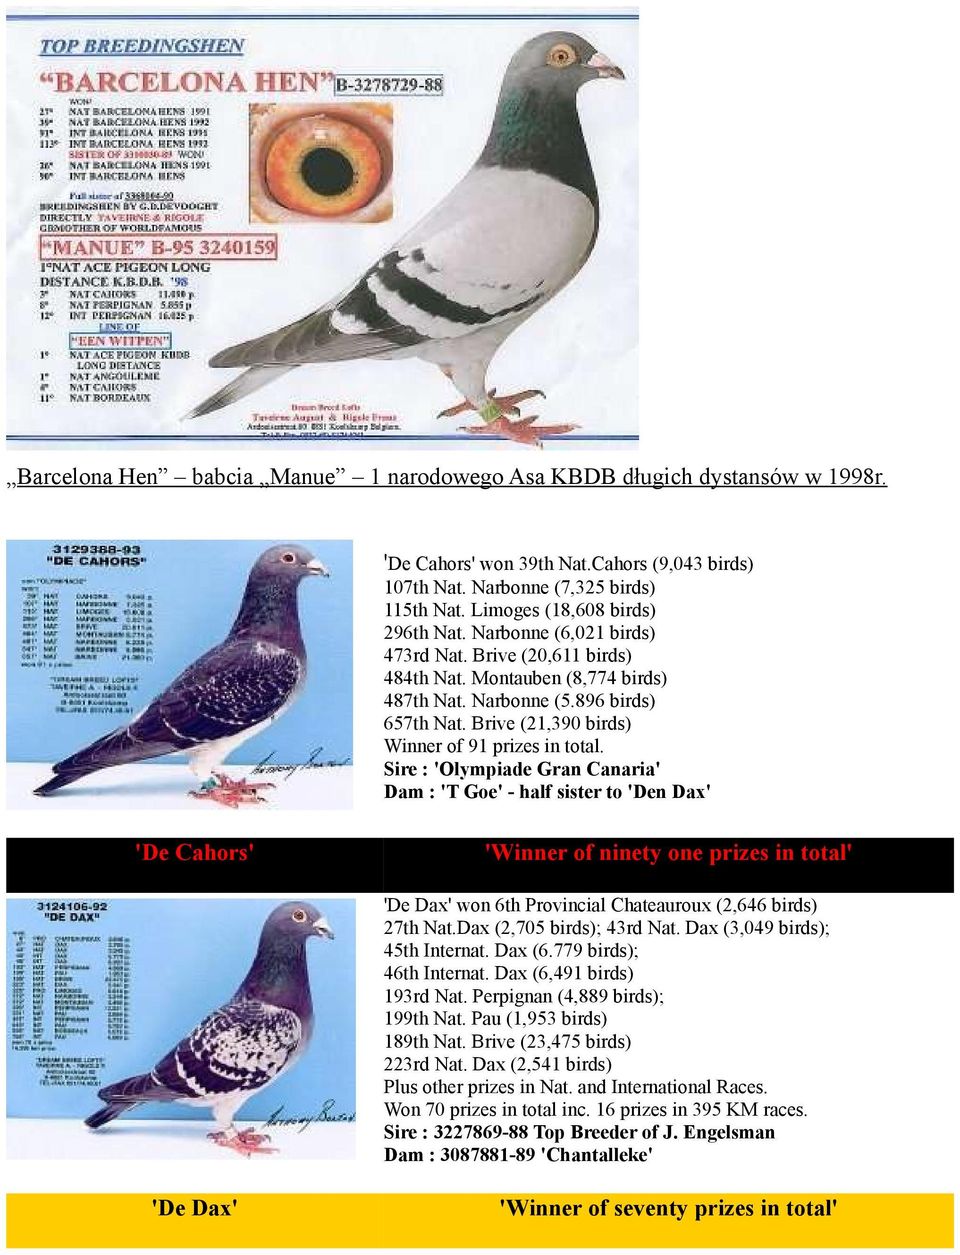 Sire : 'Olympiade Gran Canaria' Dam : 'T Goe' - half sister to 'Den Dax' 'De Cahors' 'Winner of ninety one prizes in total' 'De Dax' won 6th Provincial Chateauroux (2,646 birds) 27th Nat.